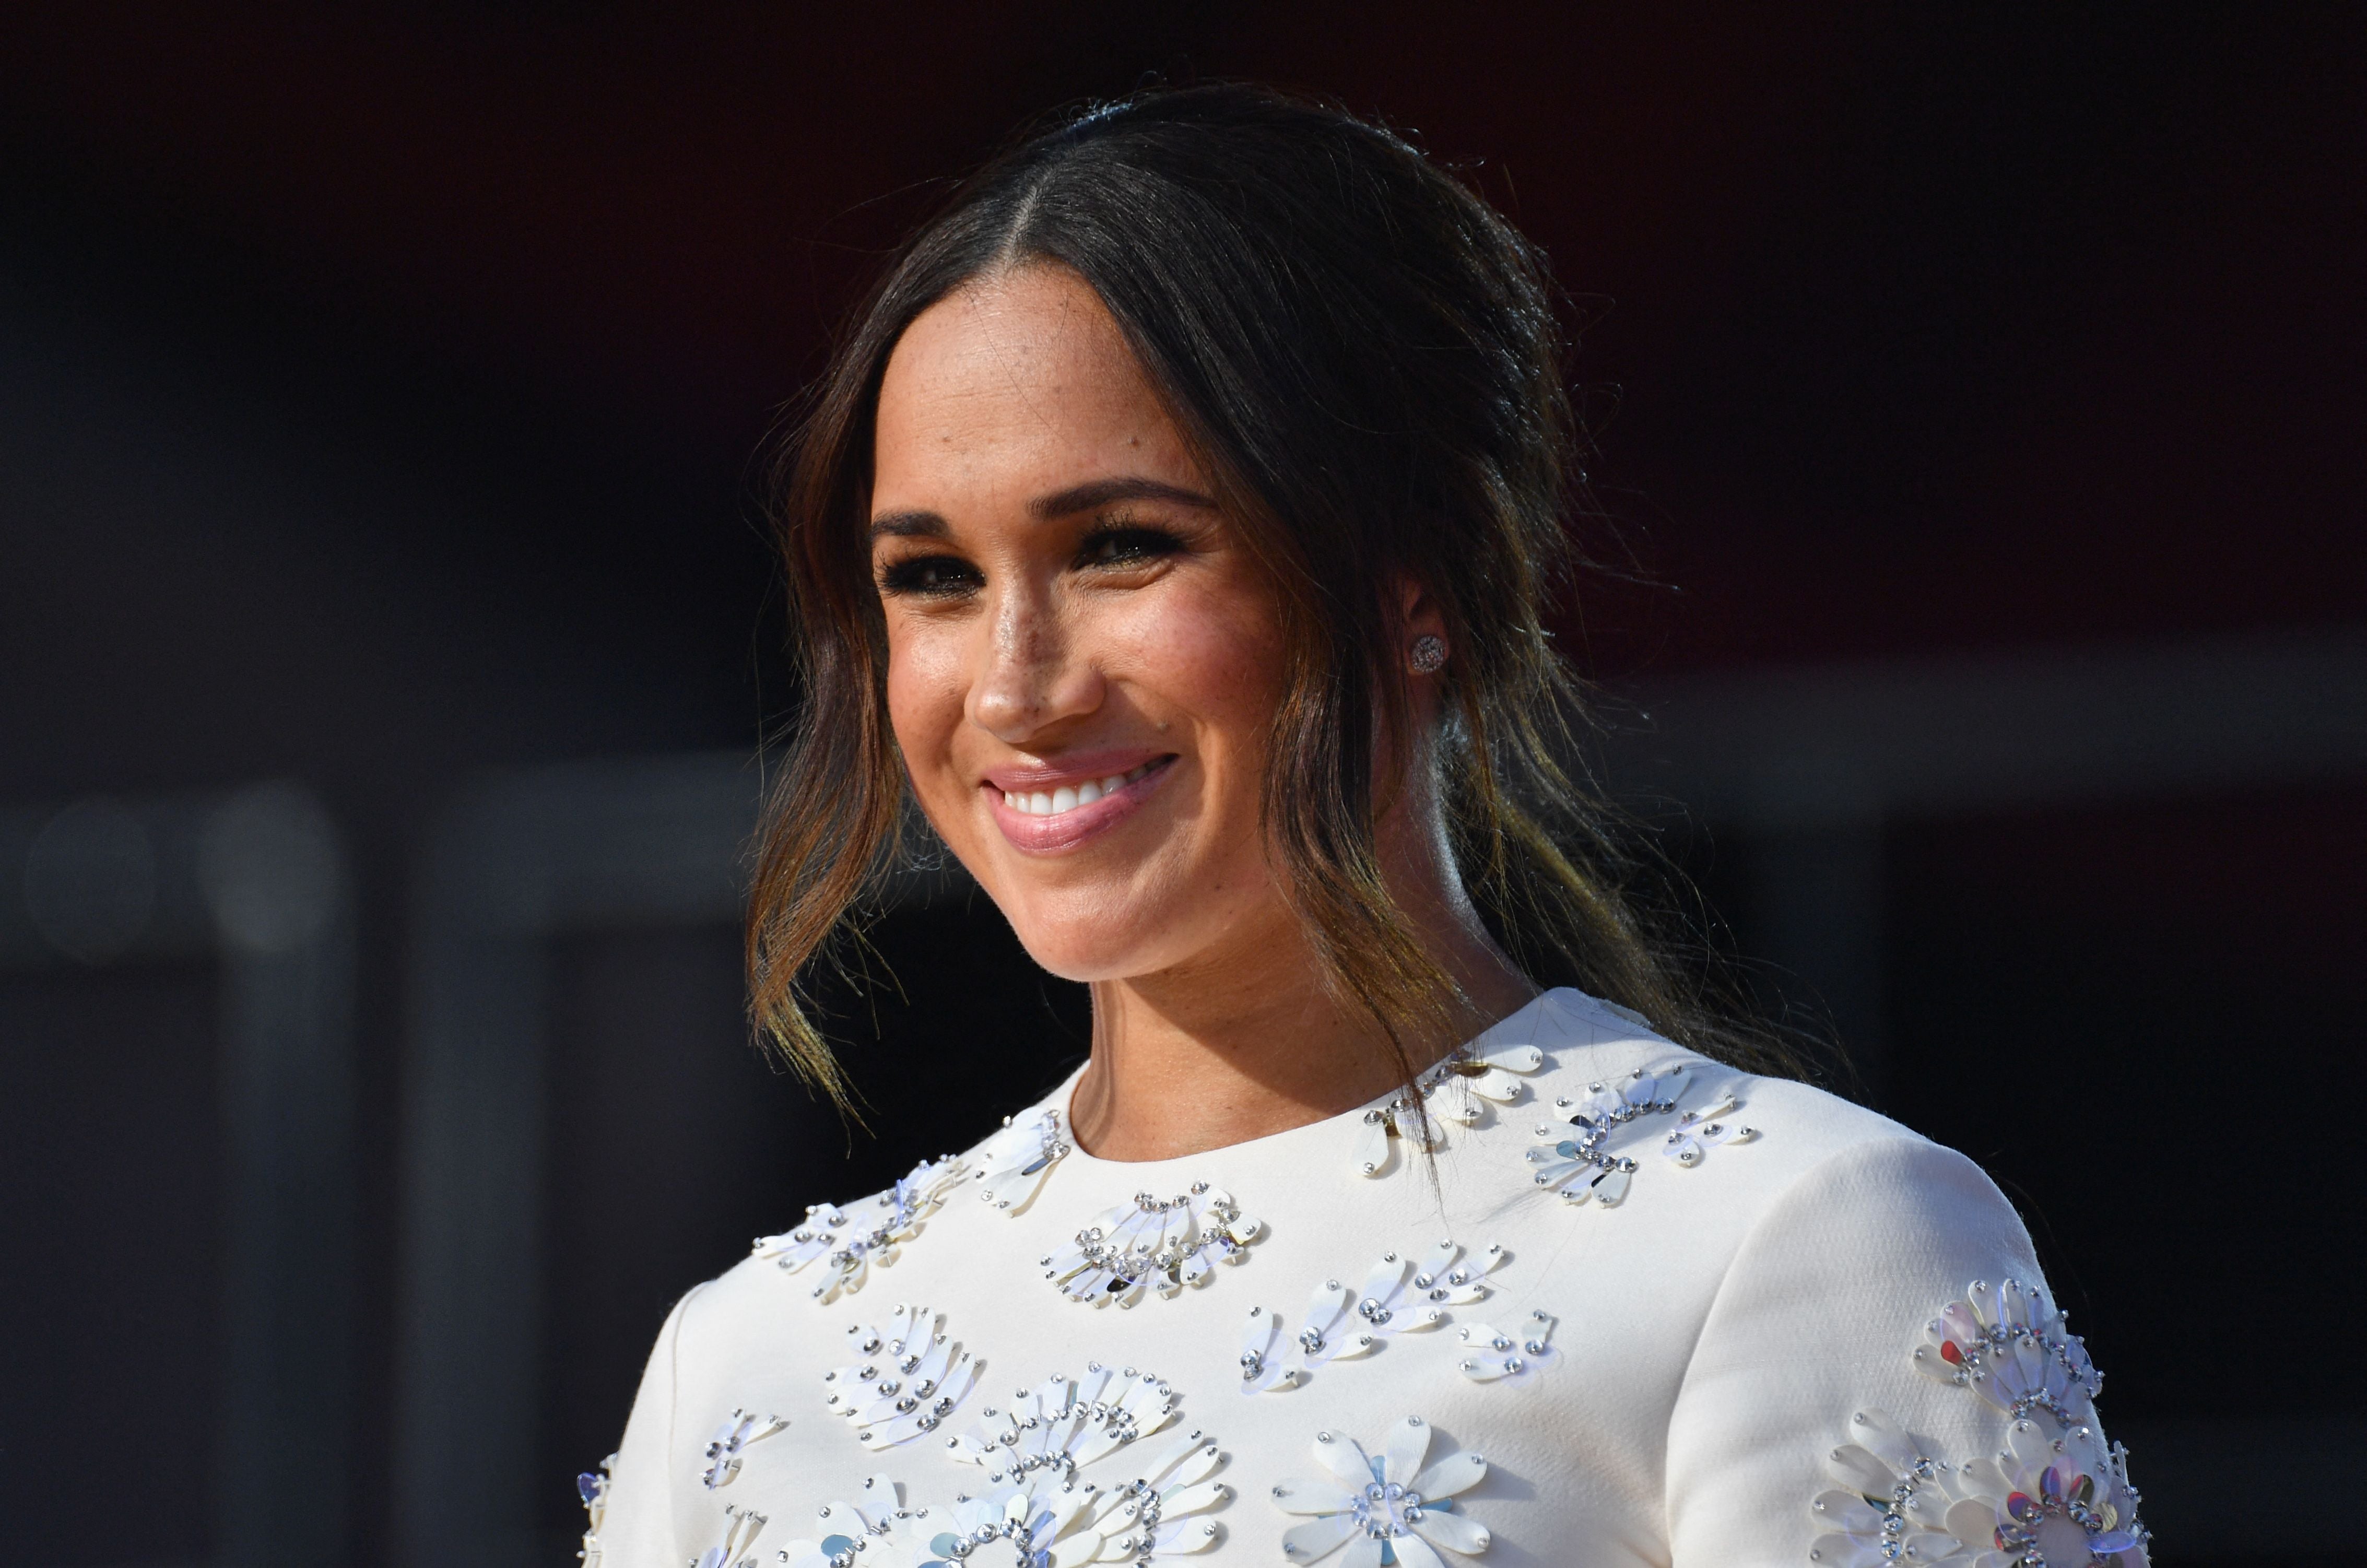 Meghan Markle advocates for paid leave for all in letter to Congress